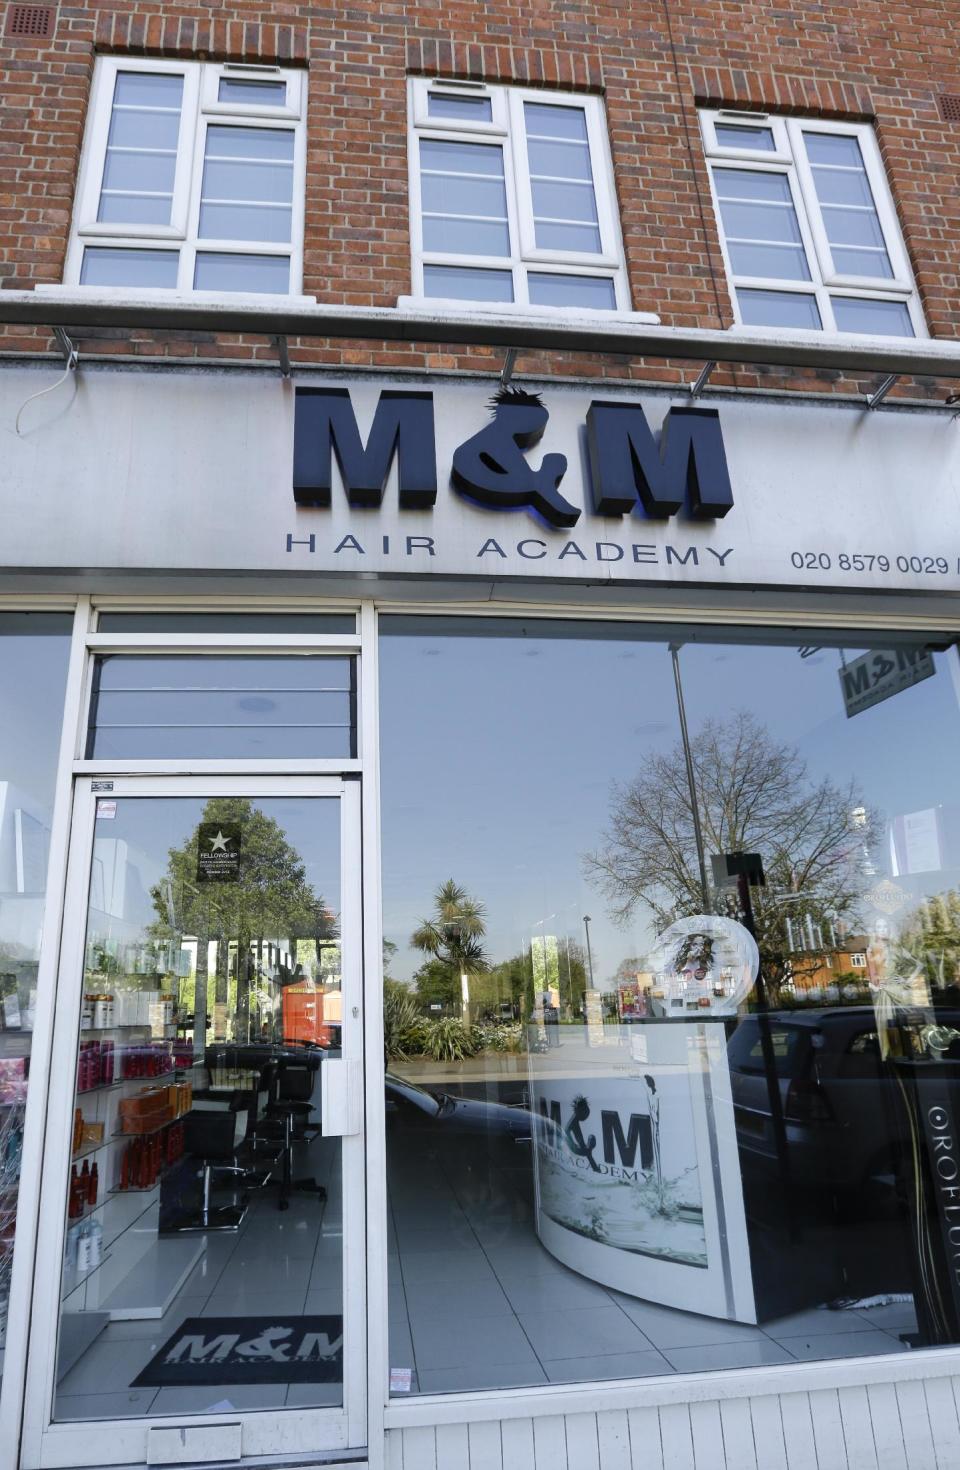 A view of M&M Hair Academy in London, Wednesday, April 16, 2014. Staff at a London hair salon say they had a close shave with North Korean officials after using the country's leader, Kim Jong Un, to promote discount haircuts. M&M Hair Academy says it received a visit by two men from the nearby North Korean embassy after putting up a poster last week featuring a picture of Kim — who sports a distinctive undercut — and the slogan "Bad Hair Day?" (AP Photo/Kirsty Wigglesworth)